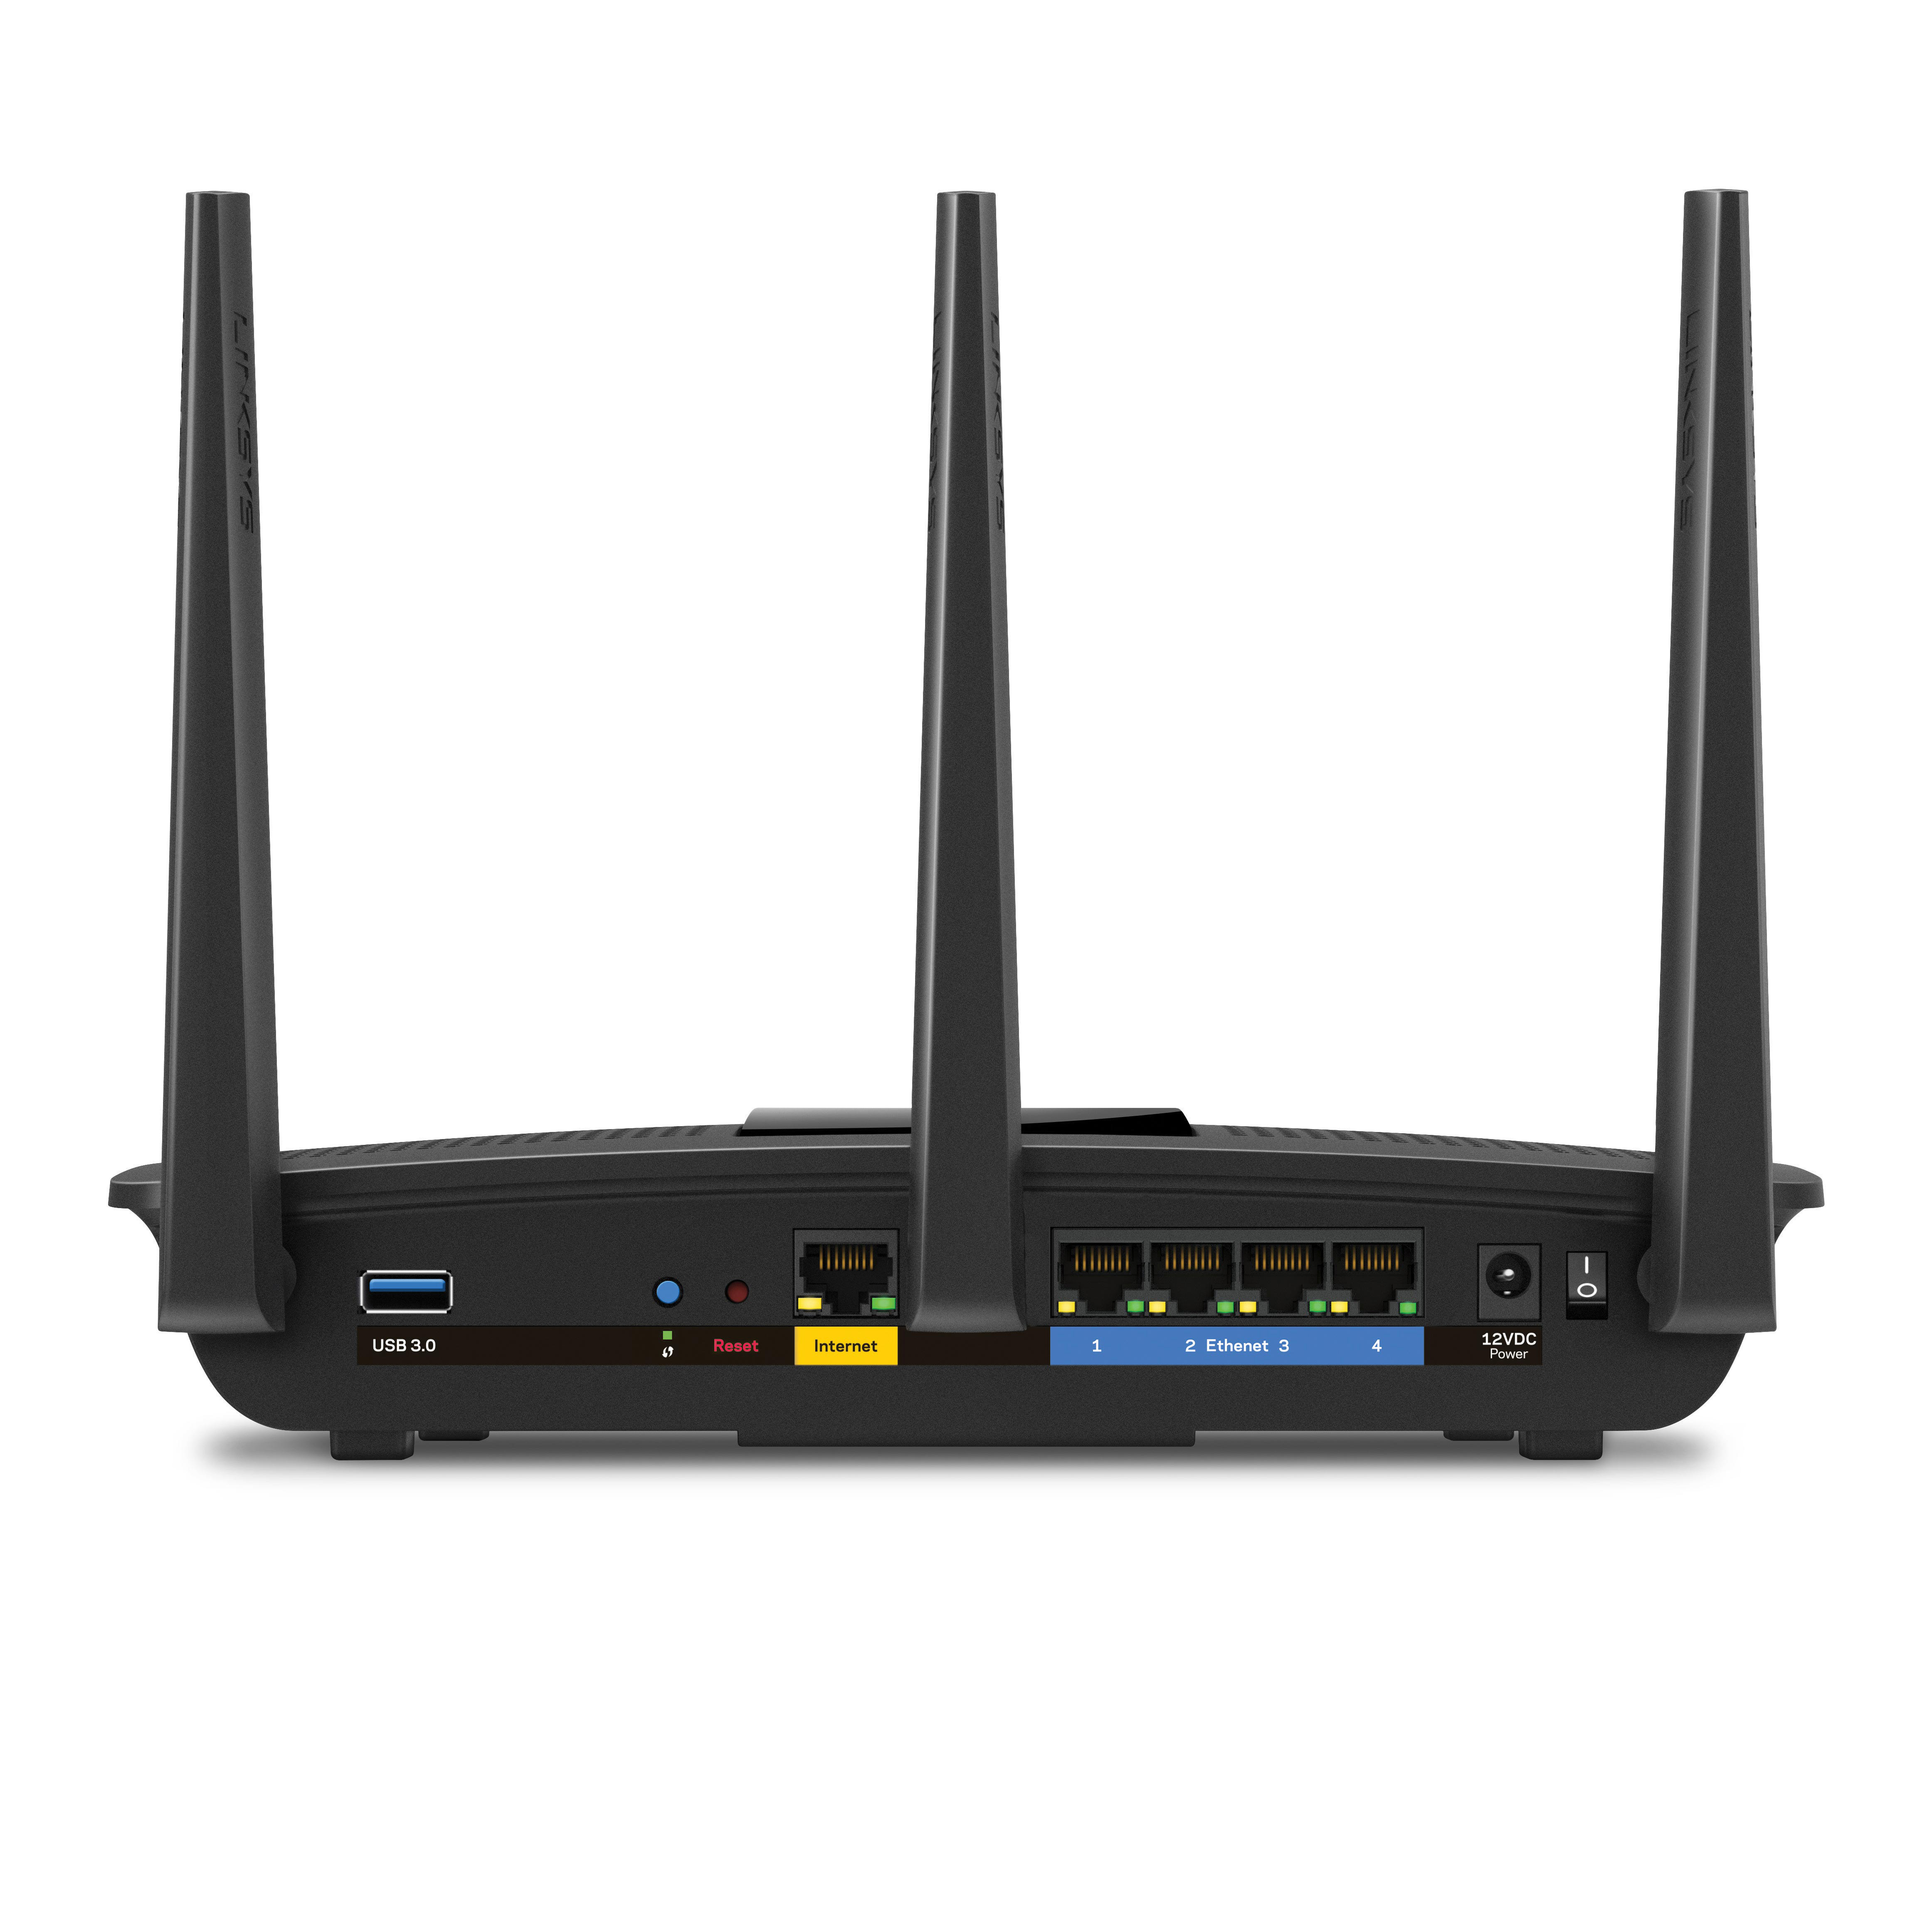 LINKSYS Router EA7300